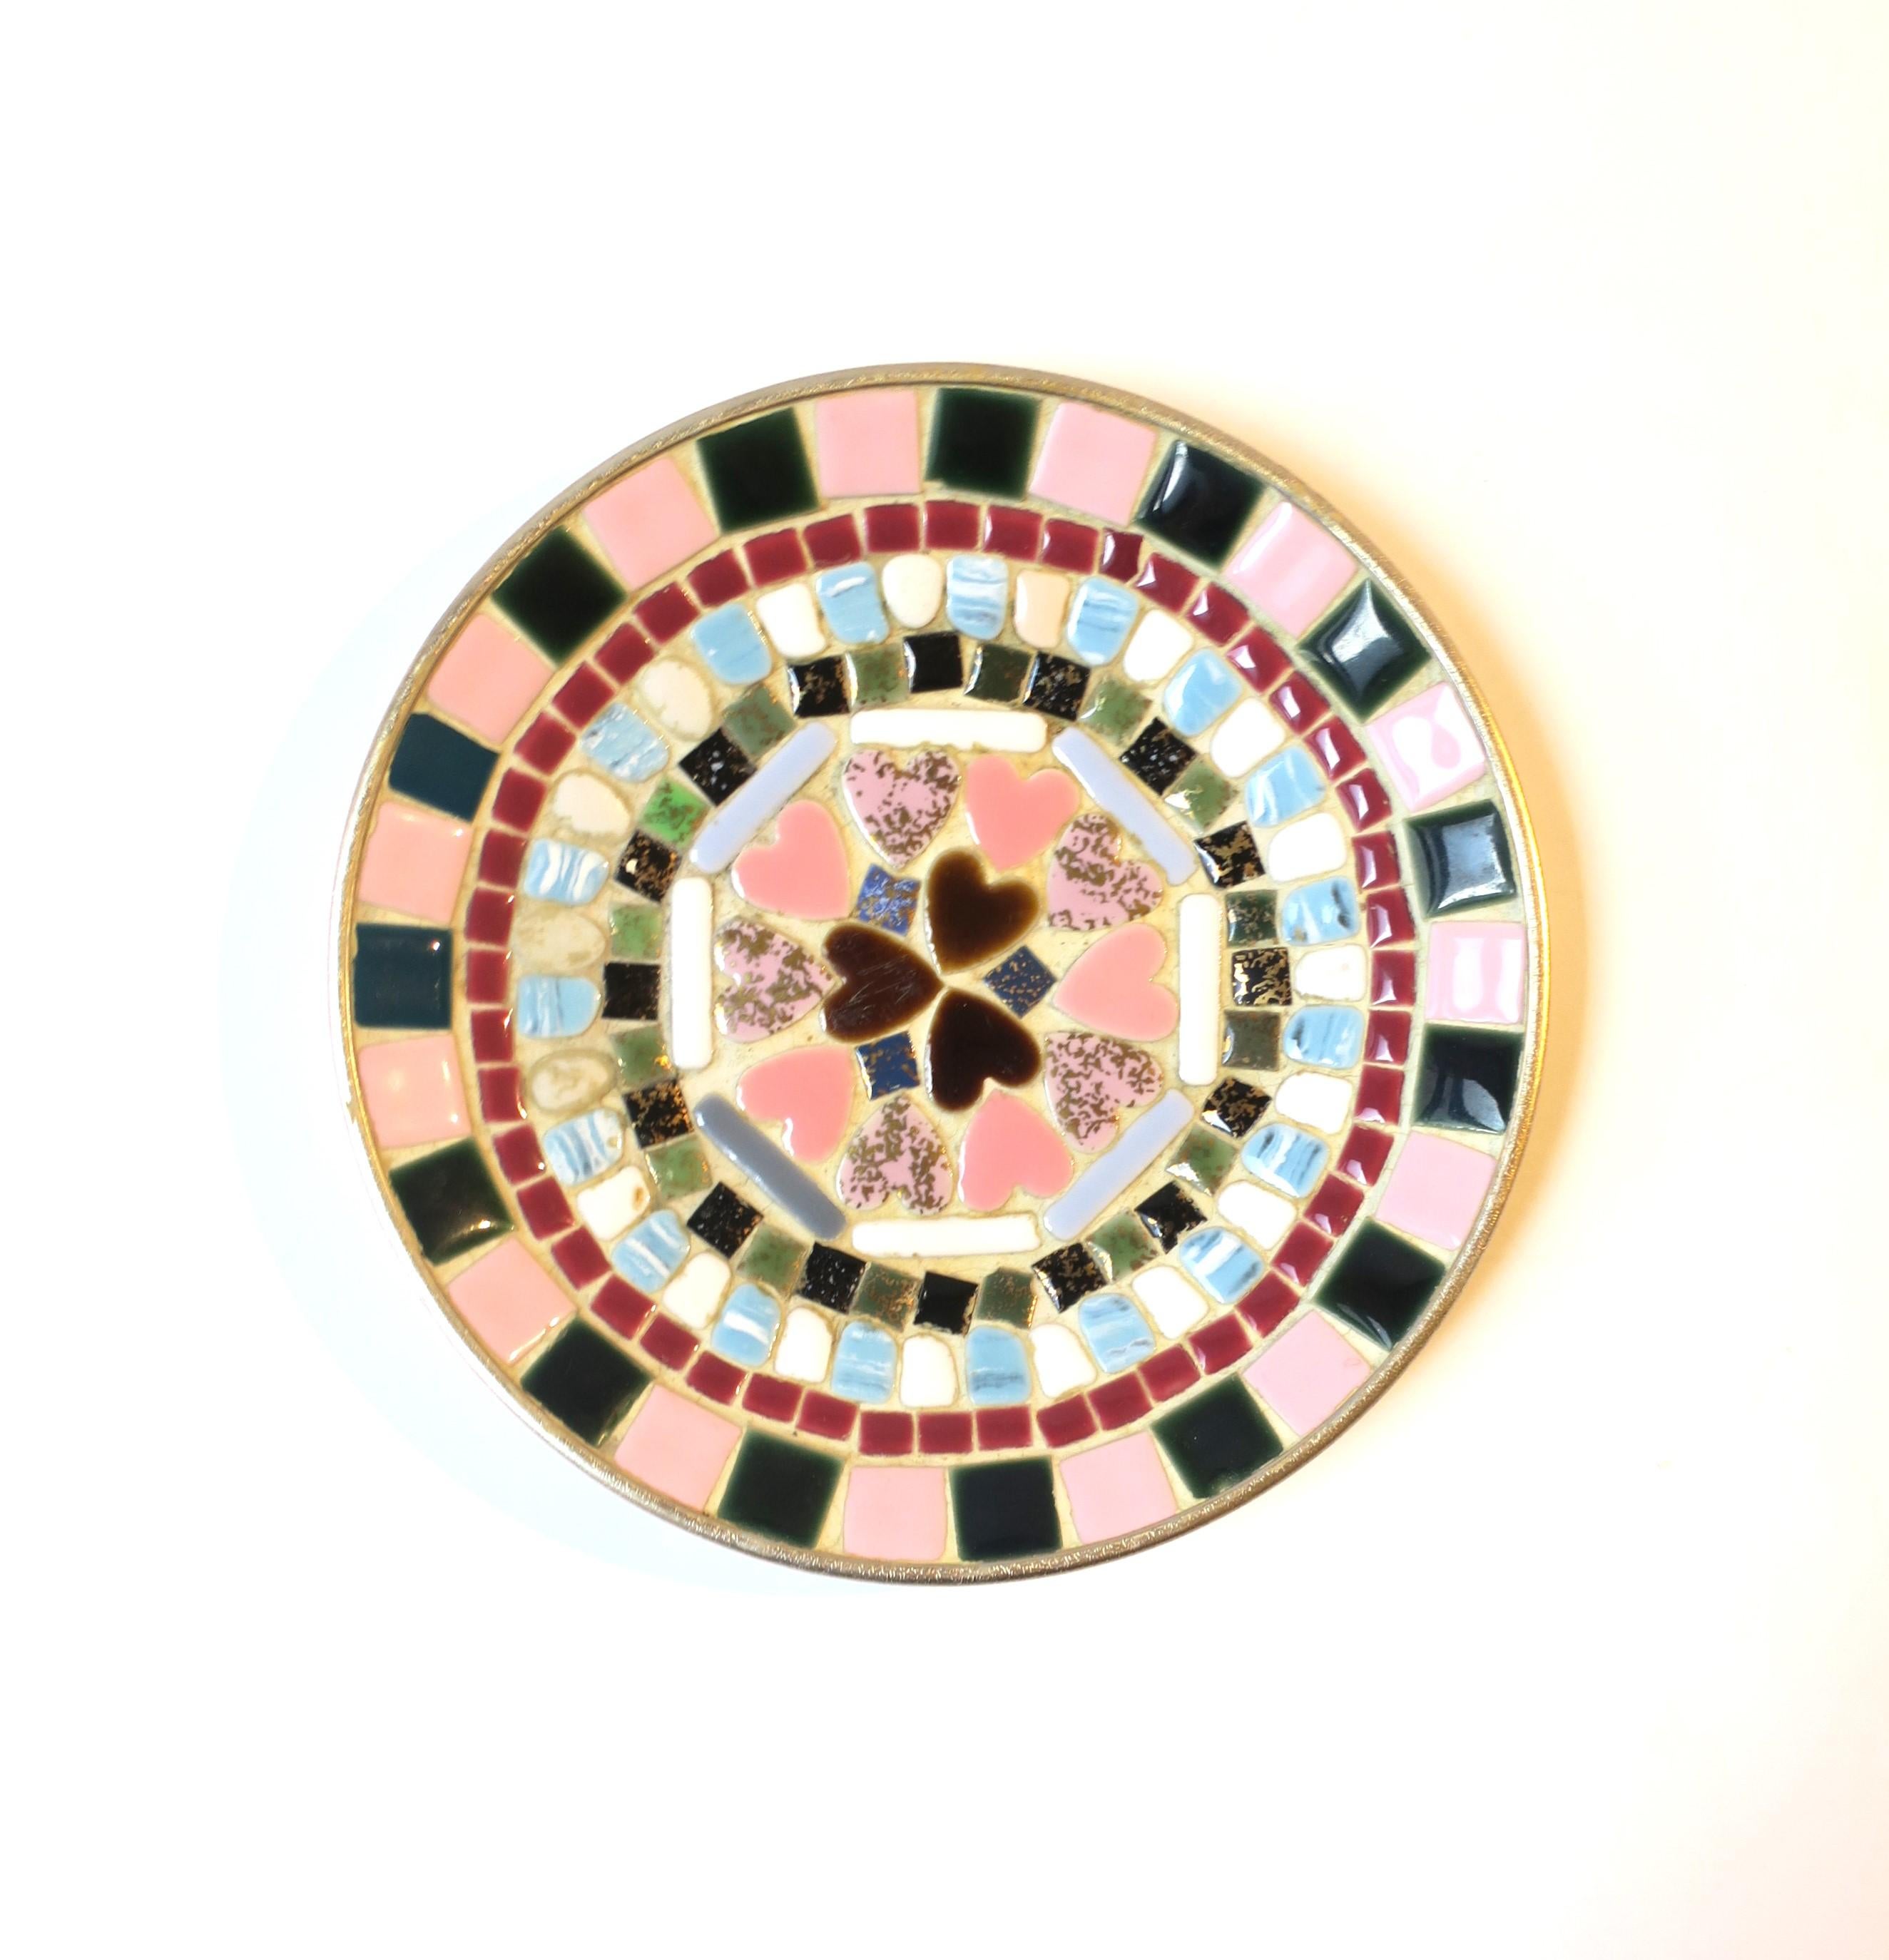 Ceramic Tile Mosaic Dish Vide-Poche with Pink Hearts, circa Mid-20th Century For Sale 1